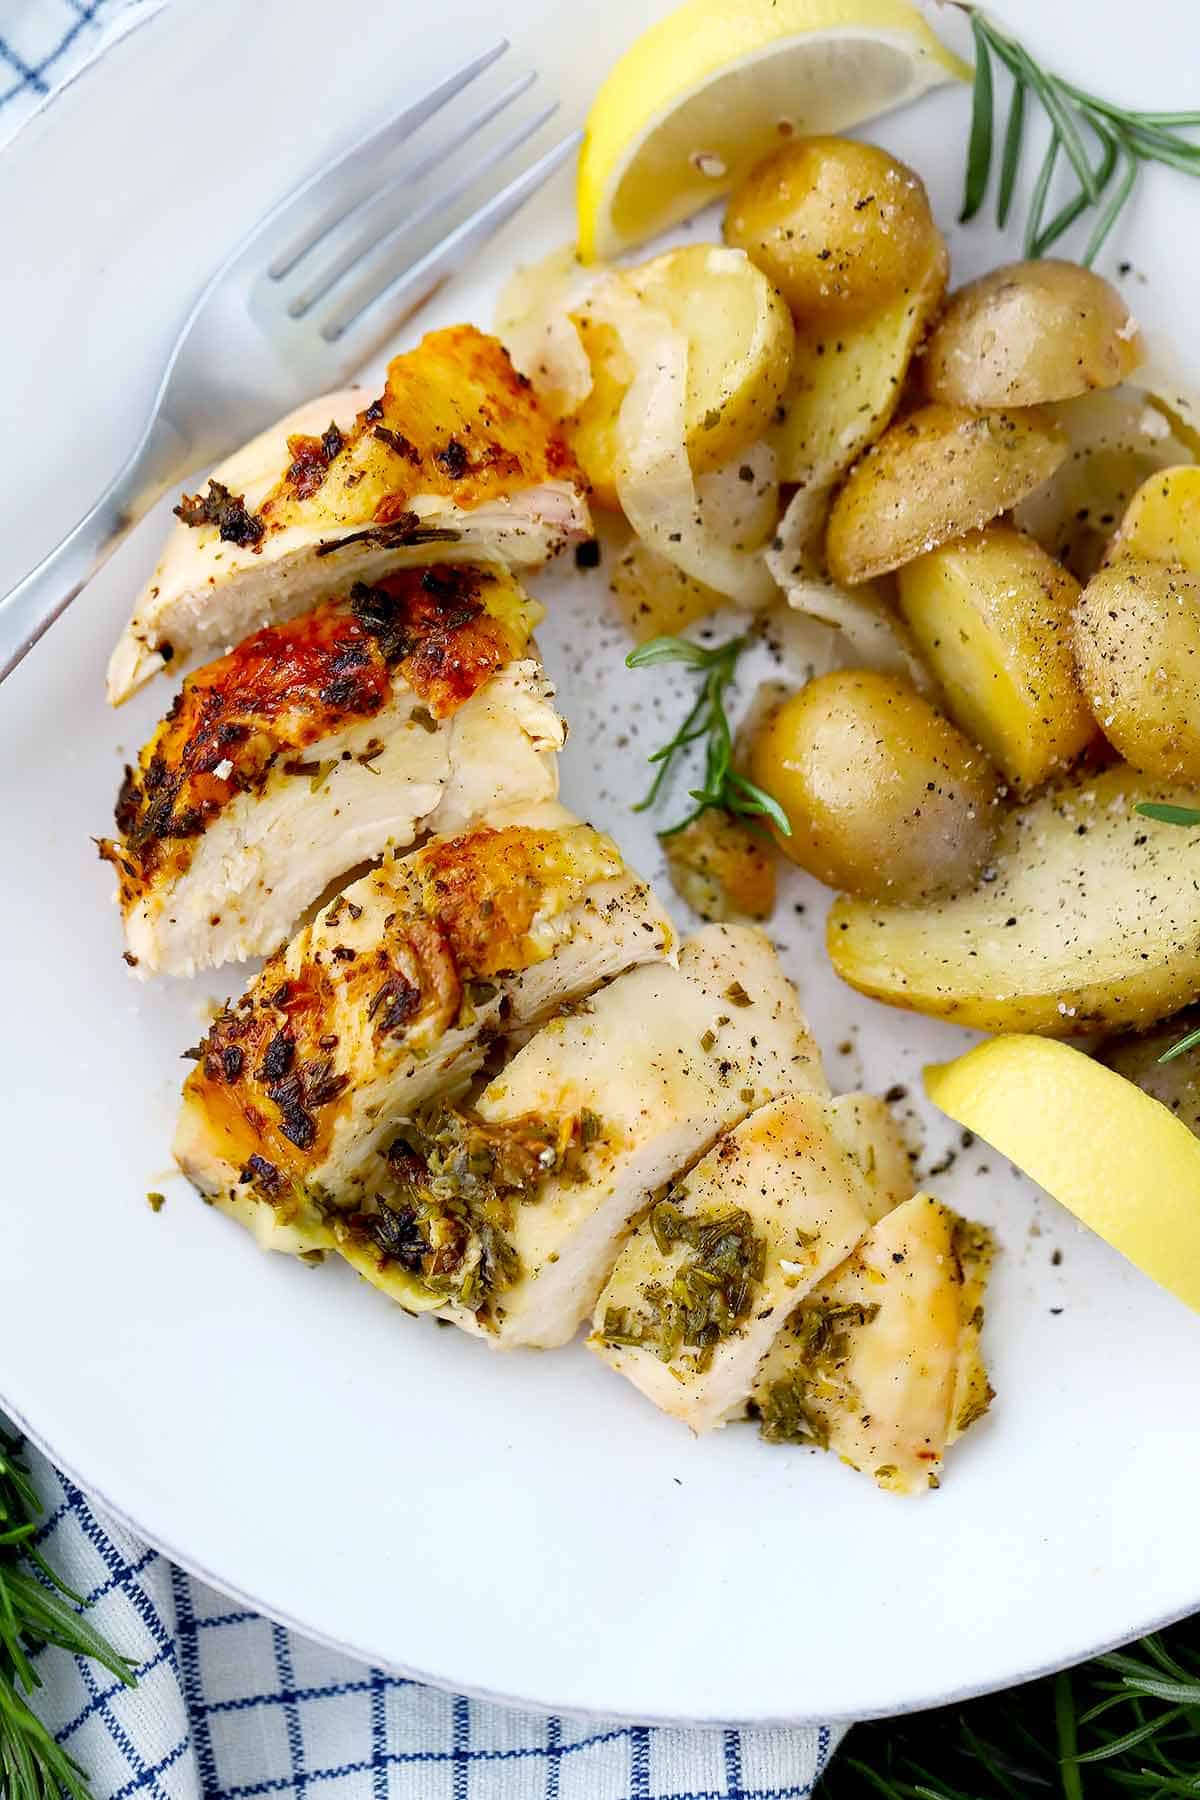 A sliced roasted chicken breast and potatoes on a white plate with a lemon slice.